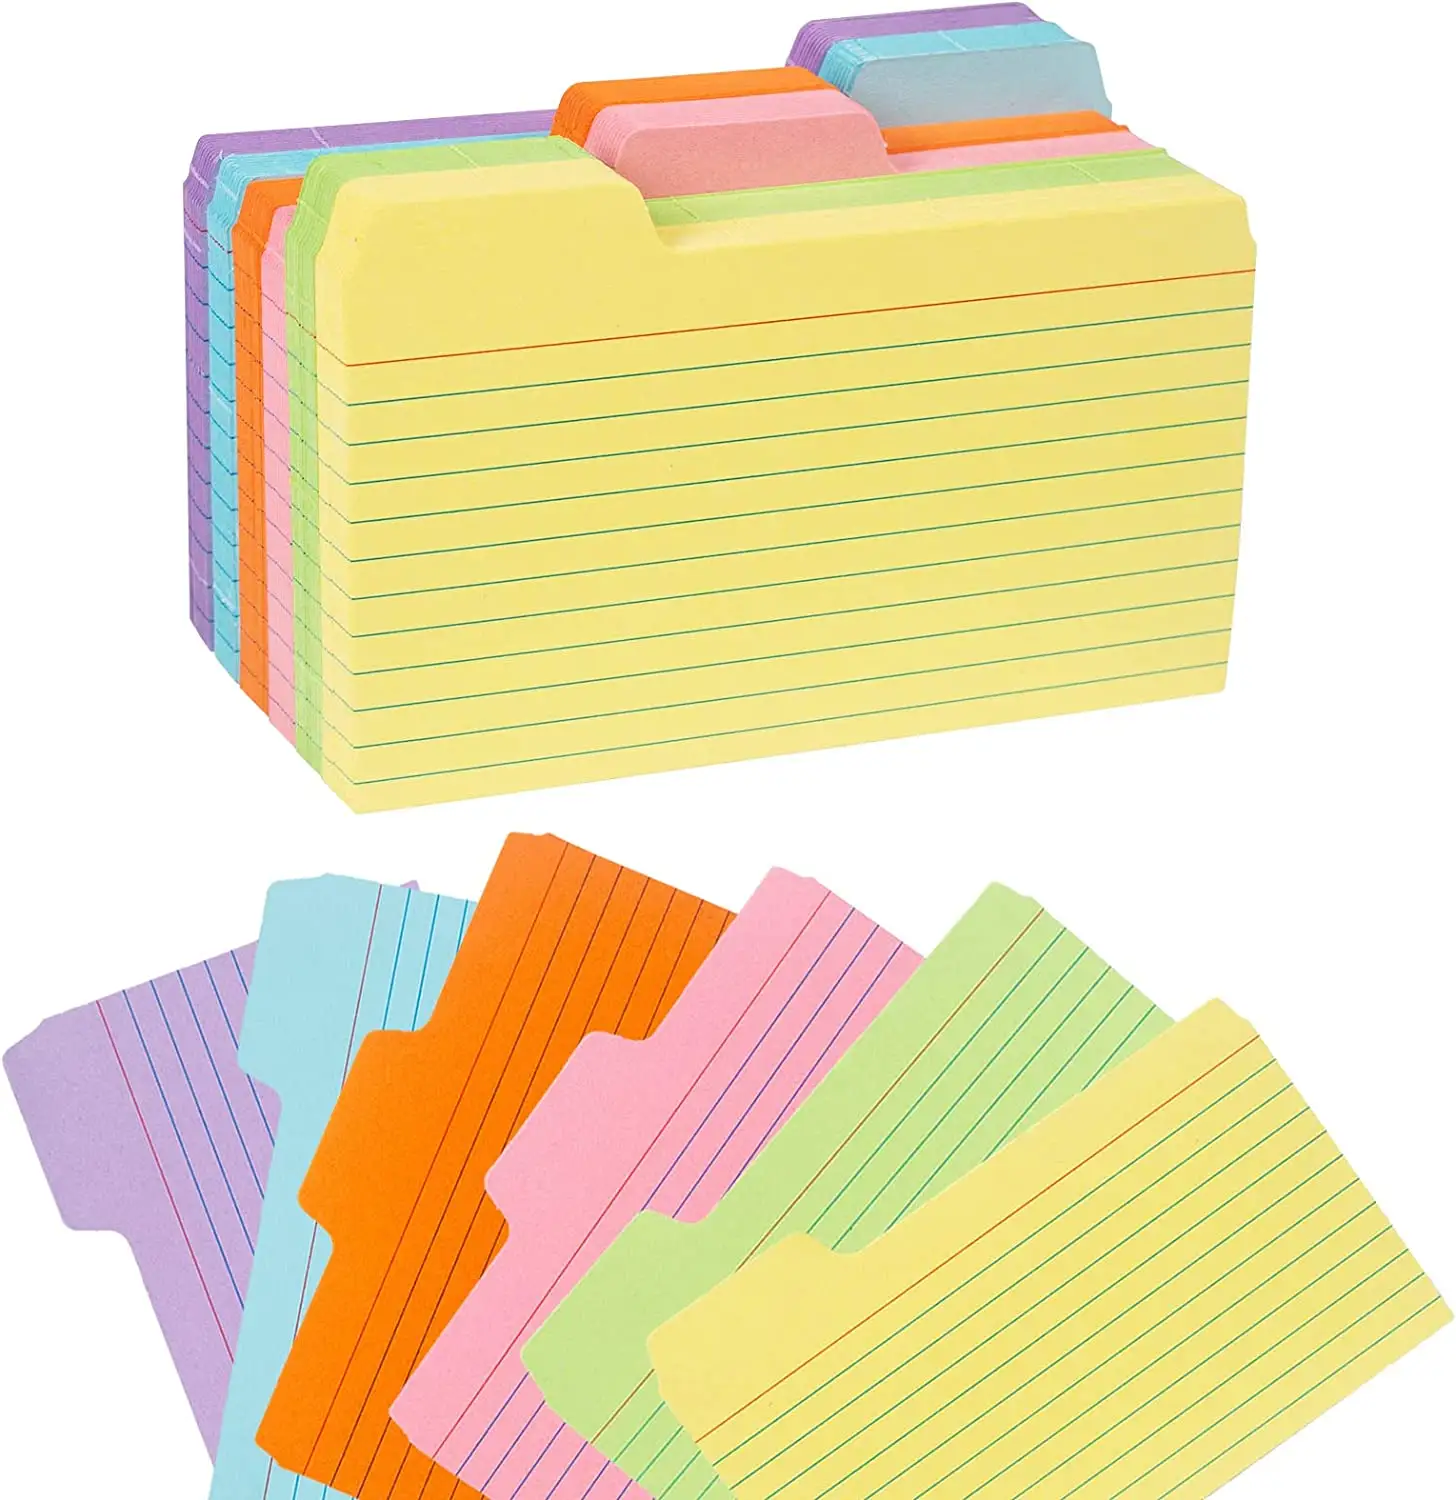 Custom Index Cards Guides inches Index Card Dividers Colorful Note Cards Study and Recipe Guides